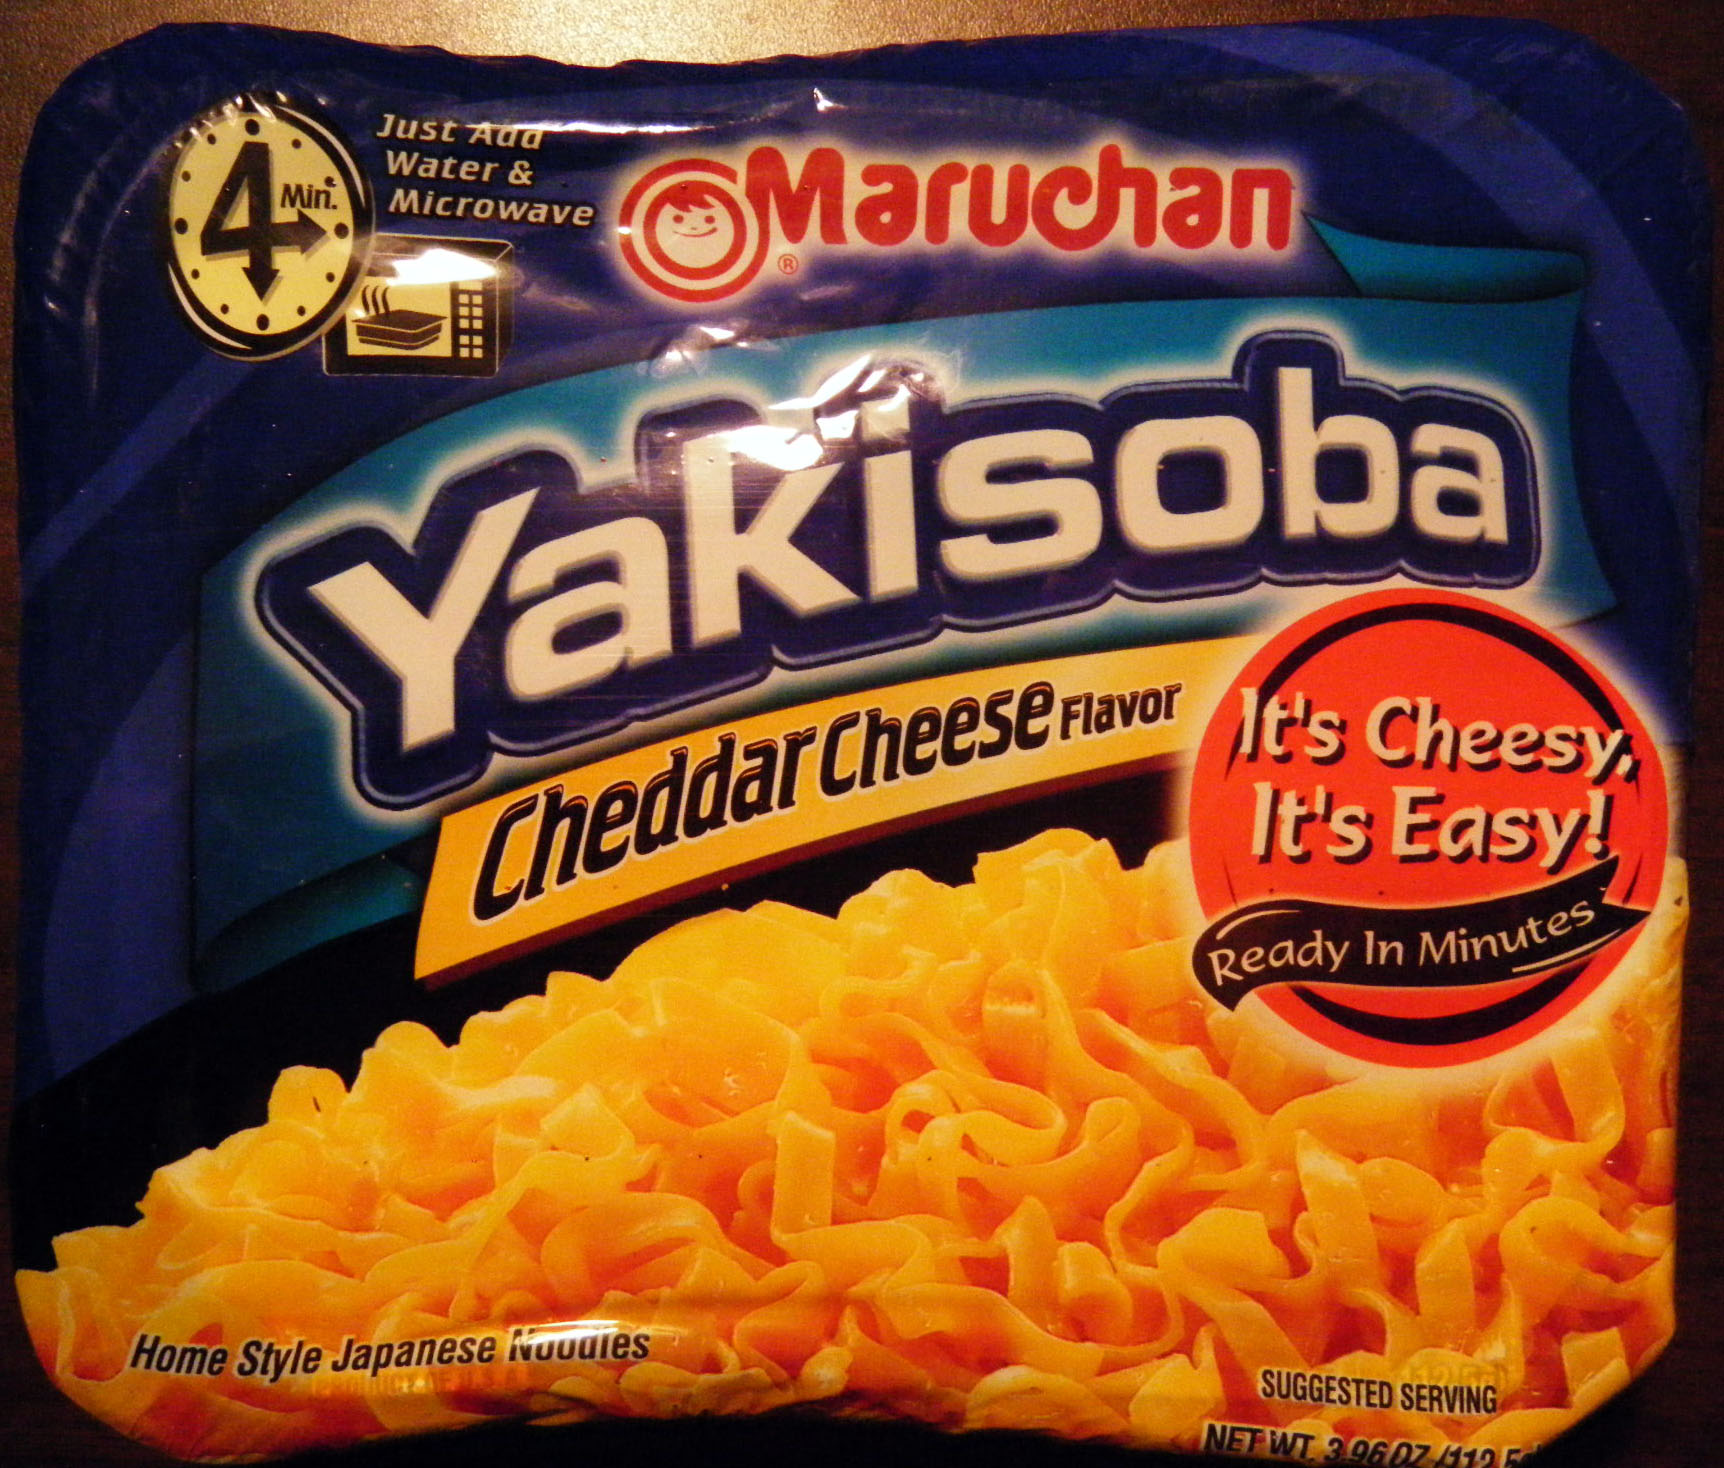 317: Maruchan Yakisoba Cheddar Cheese Flavor Home Style Japanese Noodles -  THE RAMEN RATER